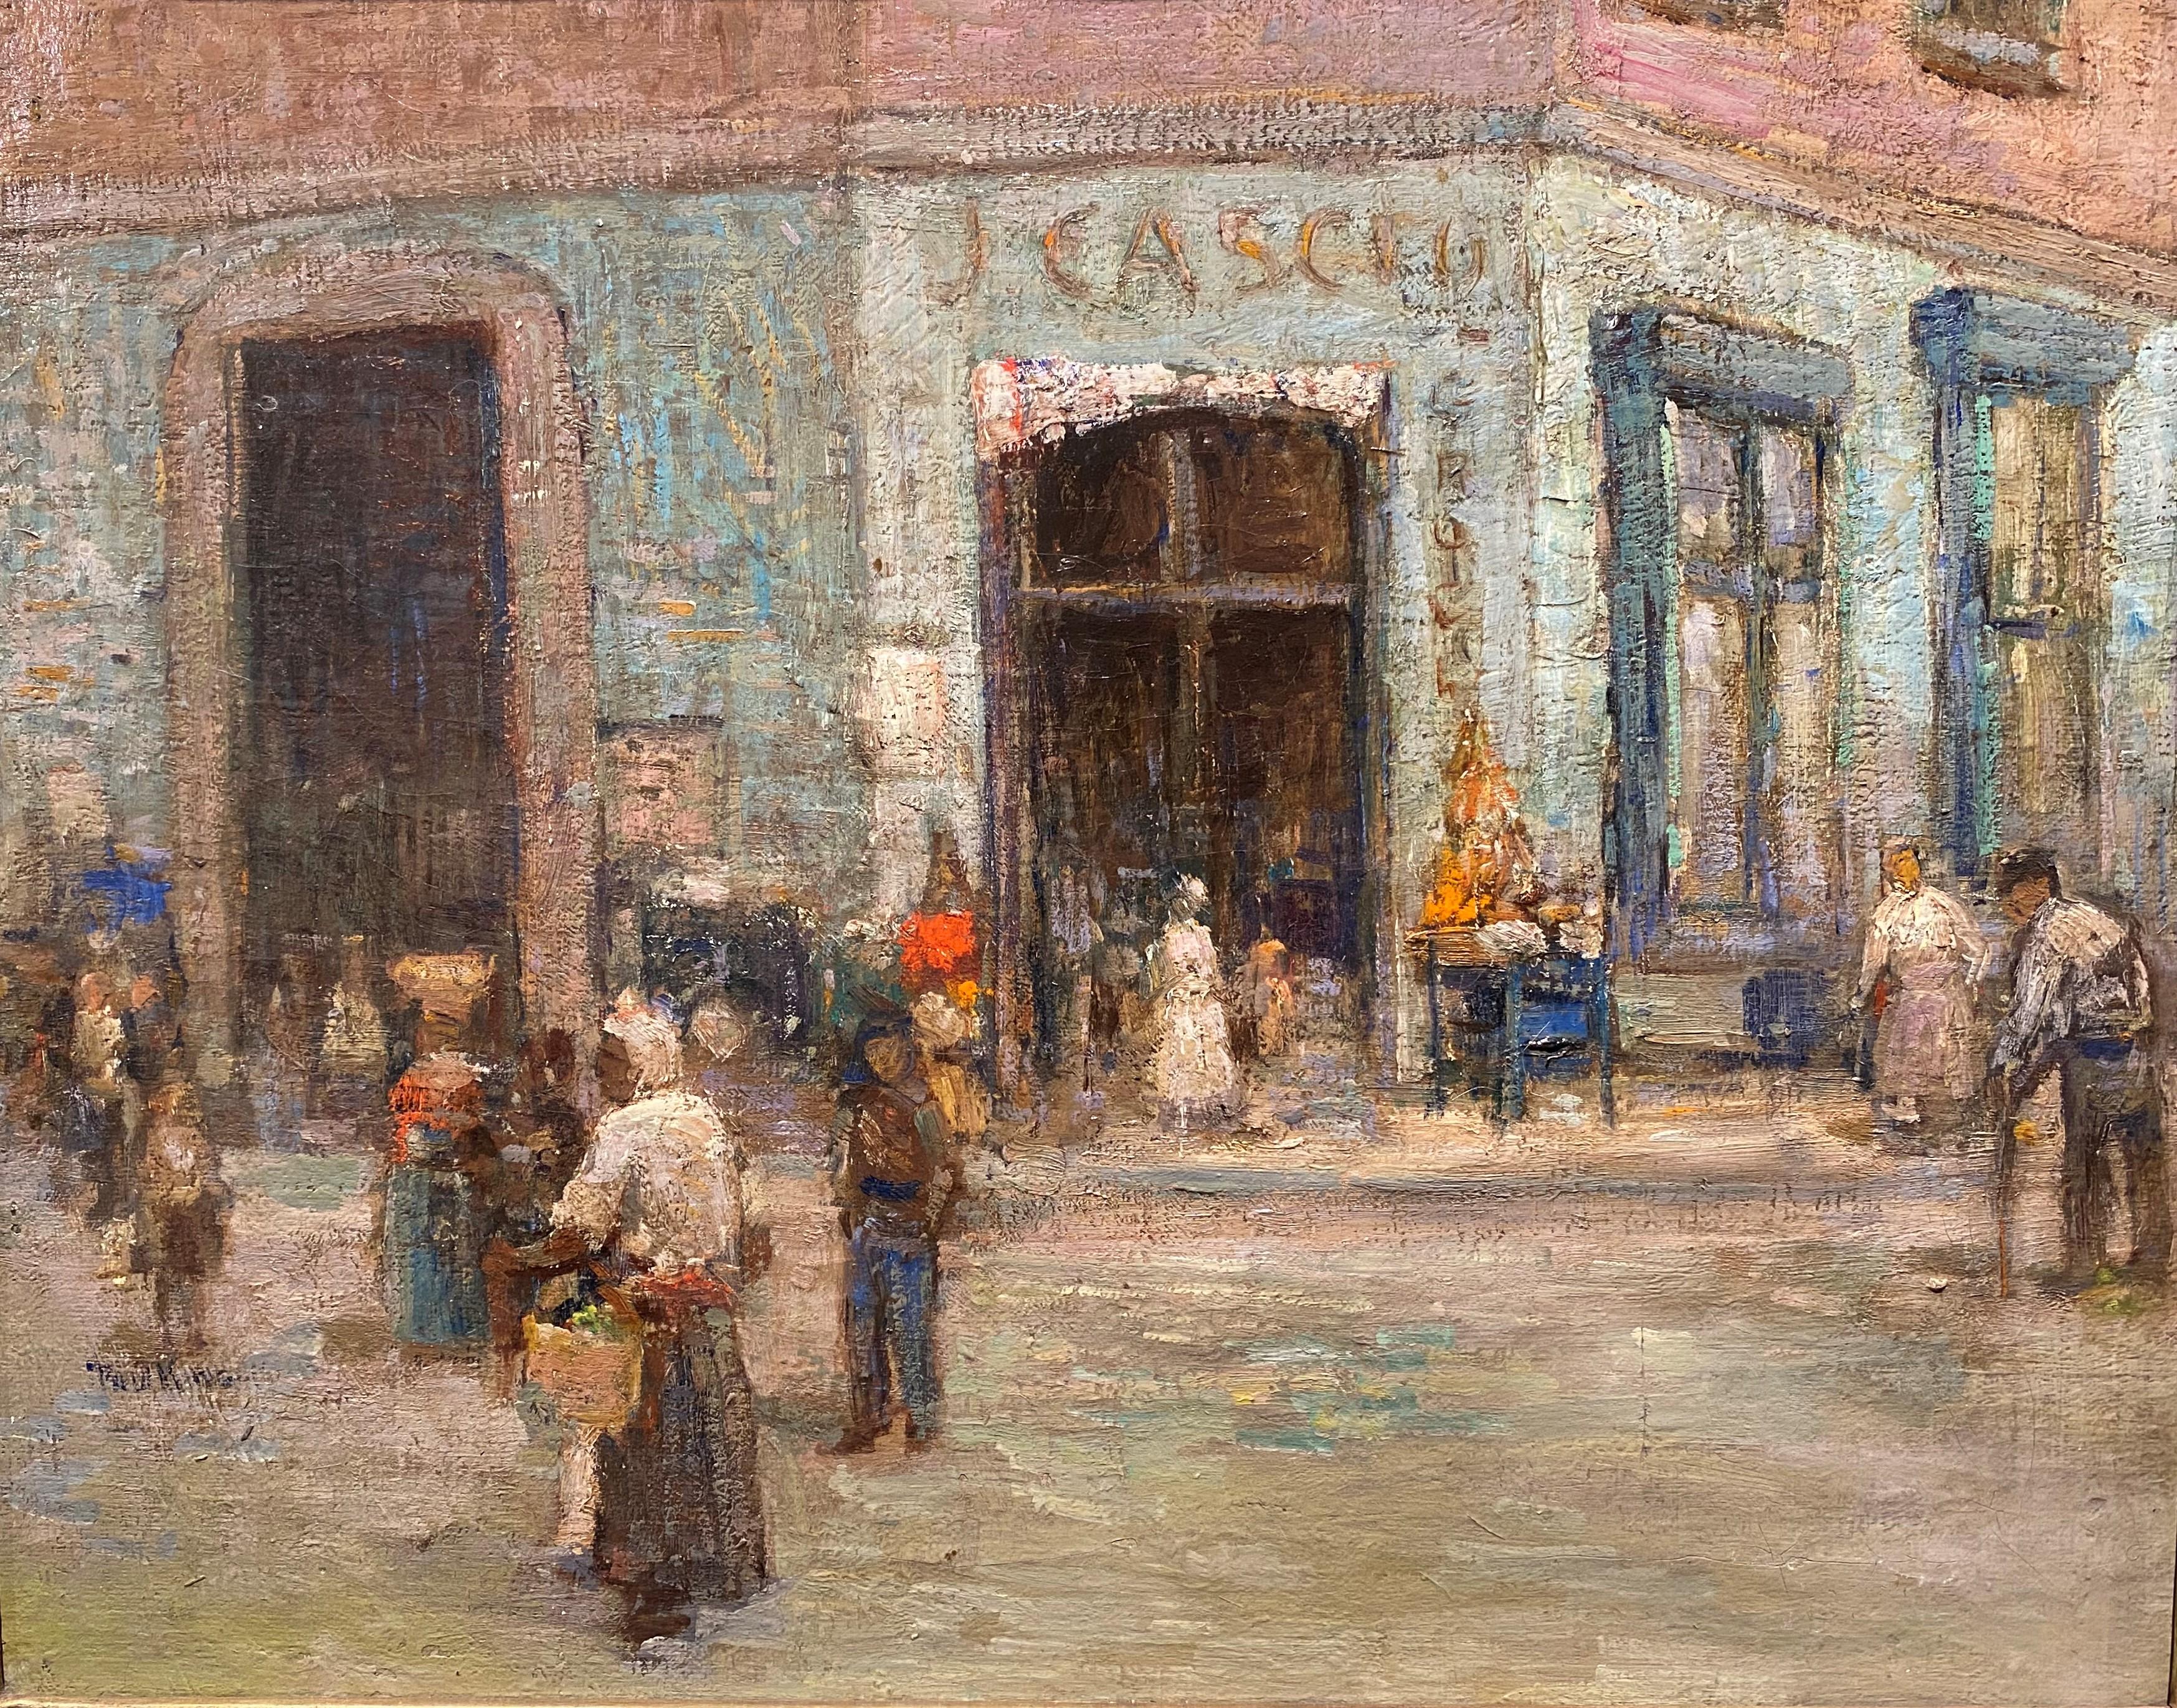 Busy Marketplace - New Orleans - Painting by Paul Bernard King